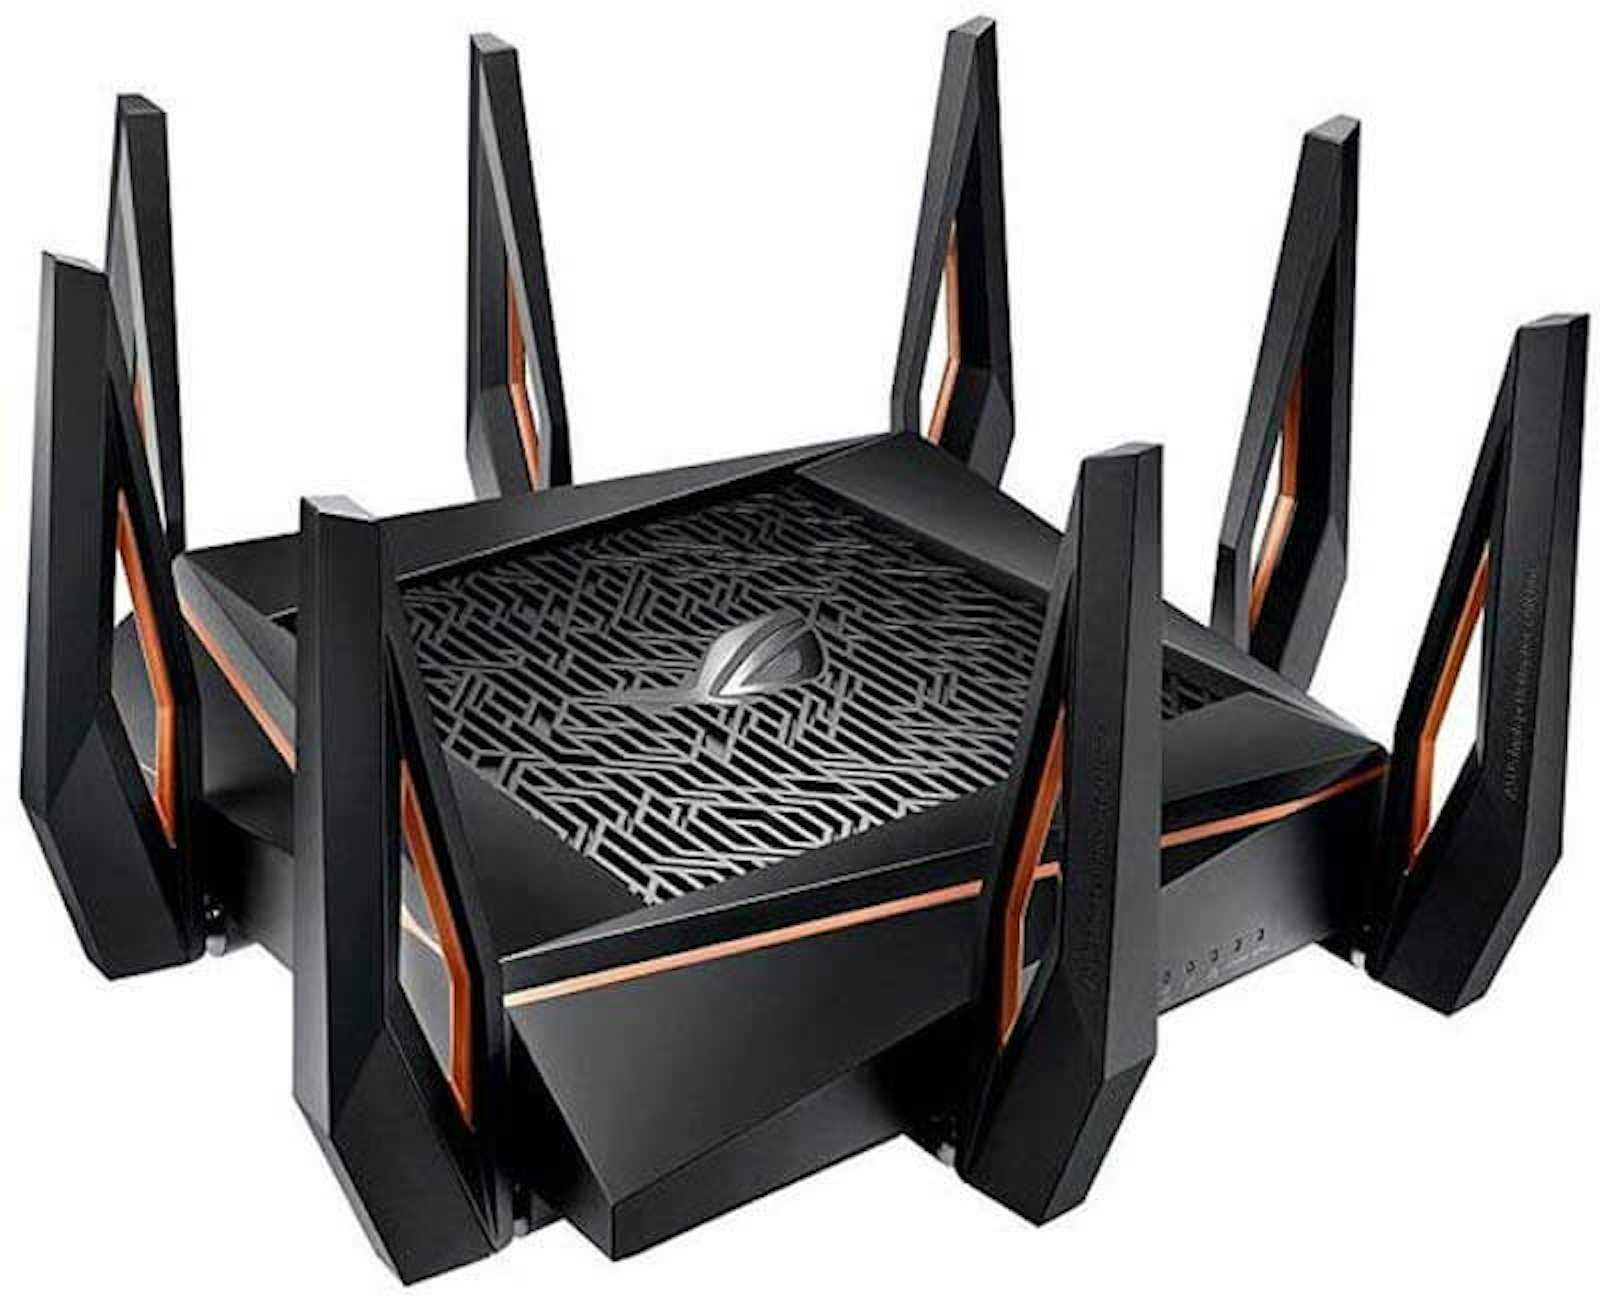 The Best Router For Any And Every Home's WiFi Needs